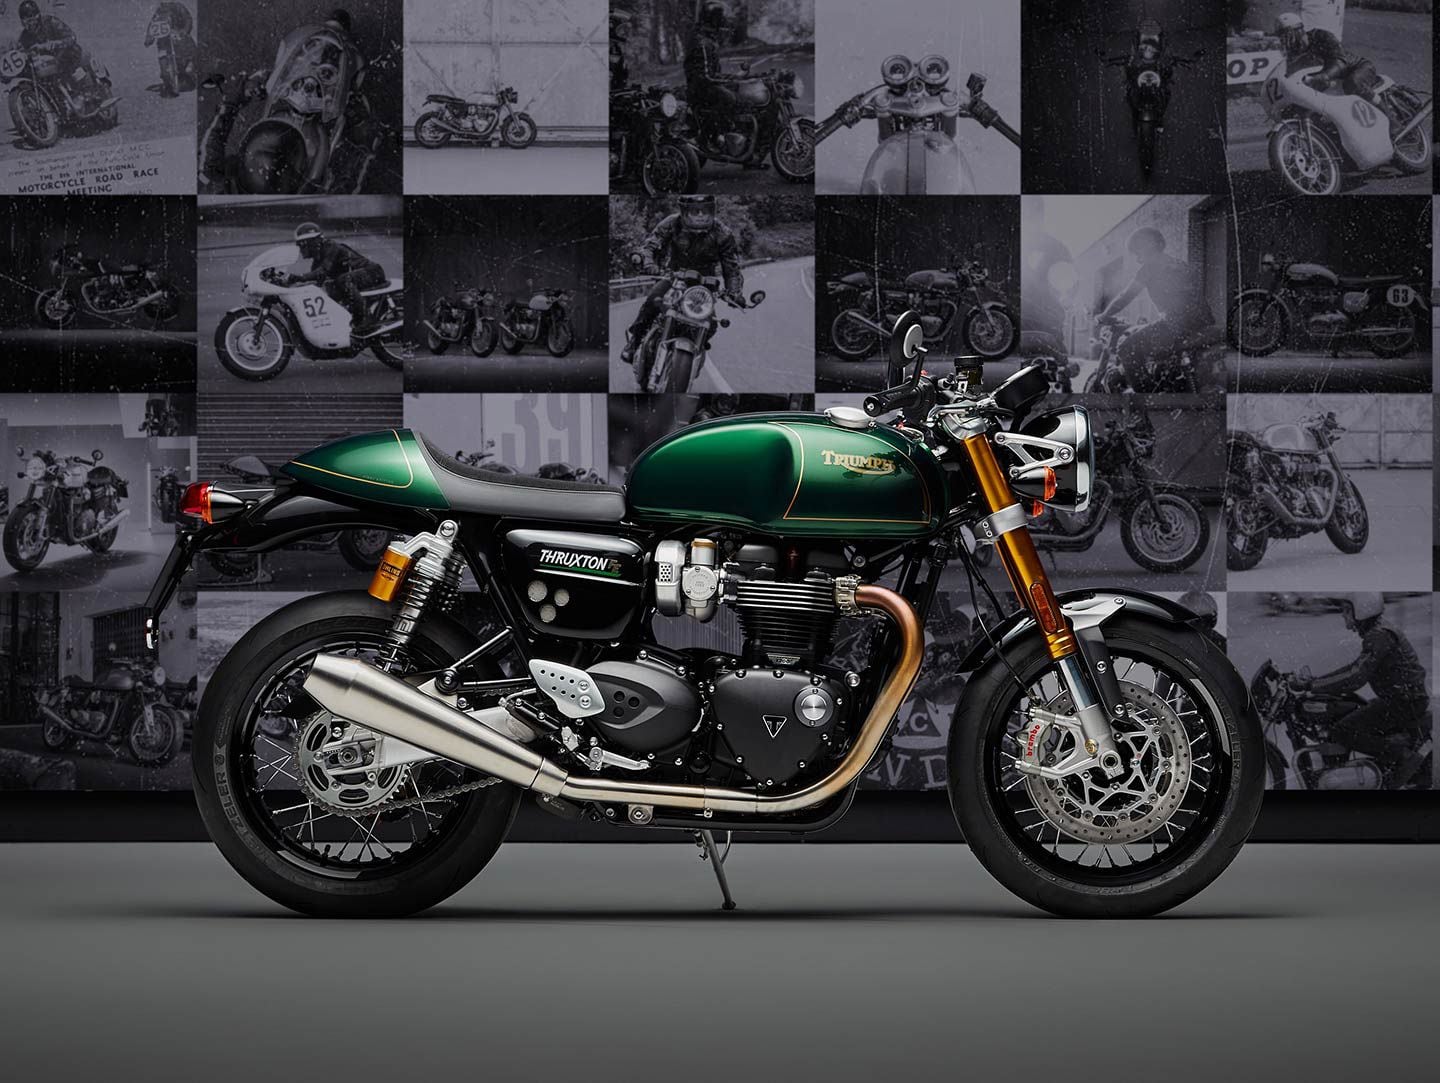 The 2025 Thruxton Final Edition will be available in 2024 as a special edition with an MSRP of $17,995 for the US.